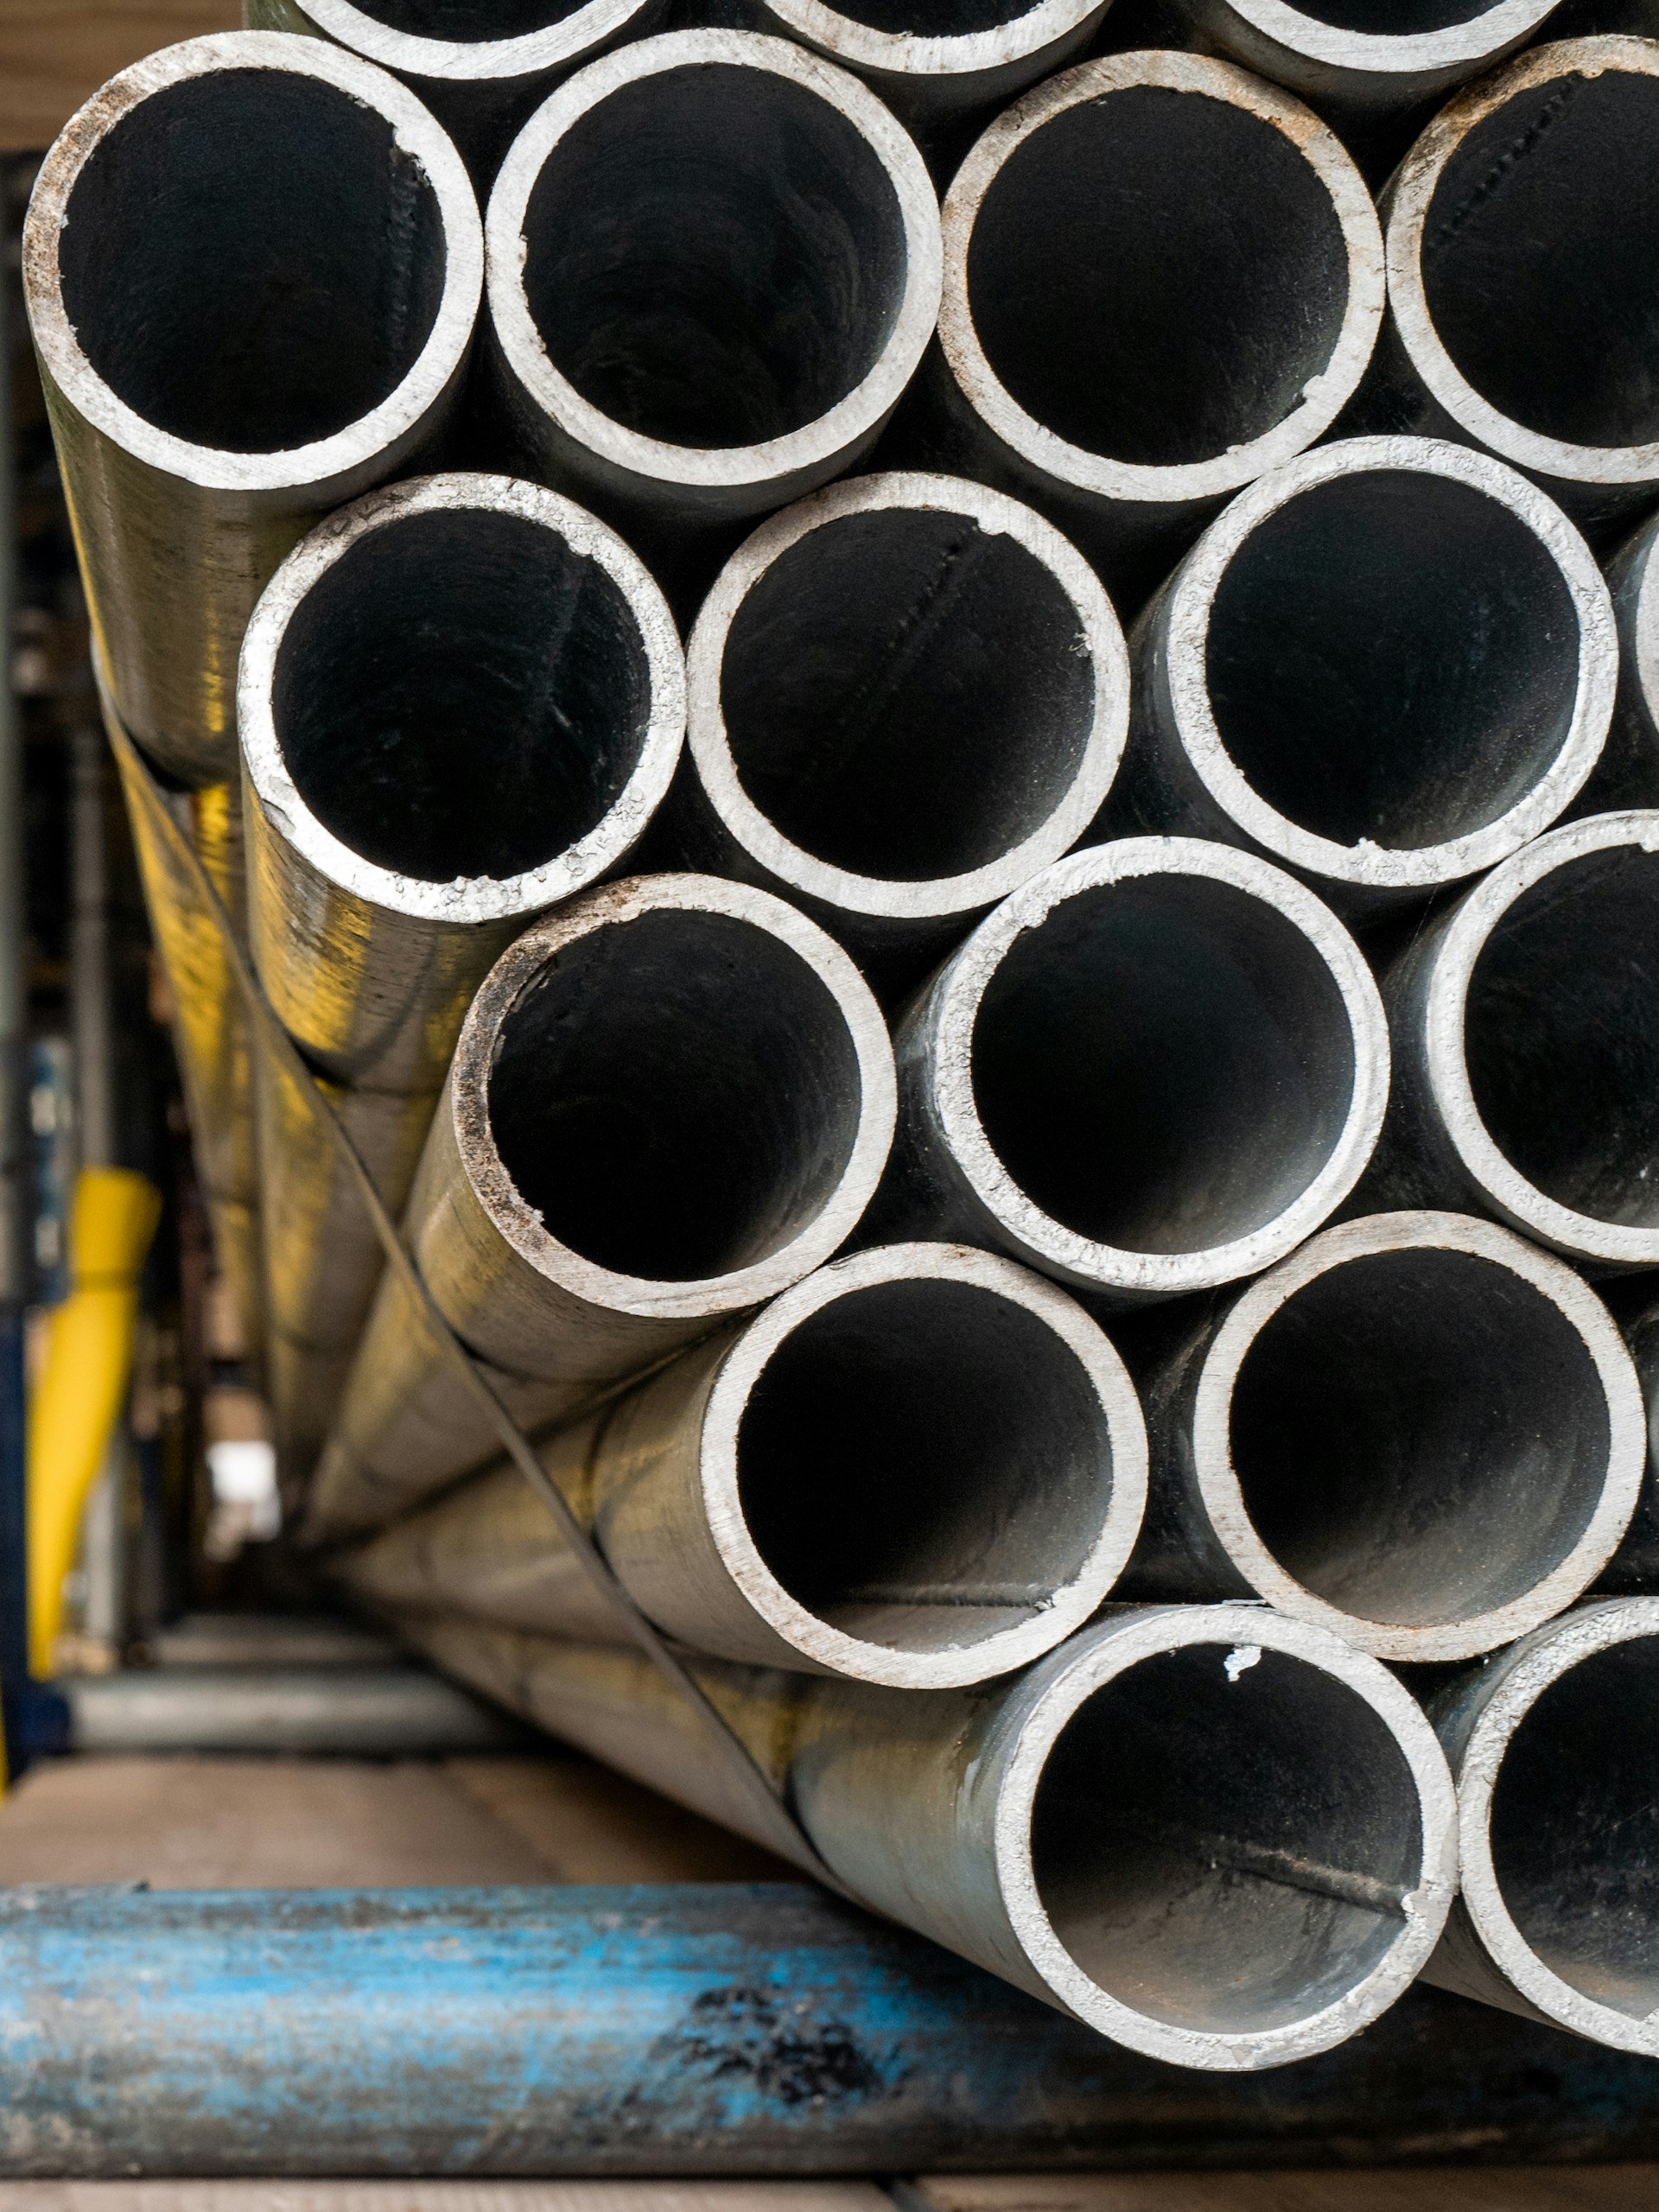 The Different Types of Plastic Pipes Plumbers Use